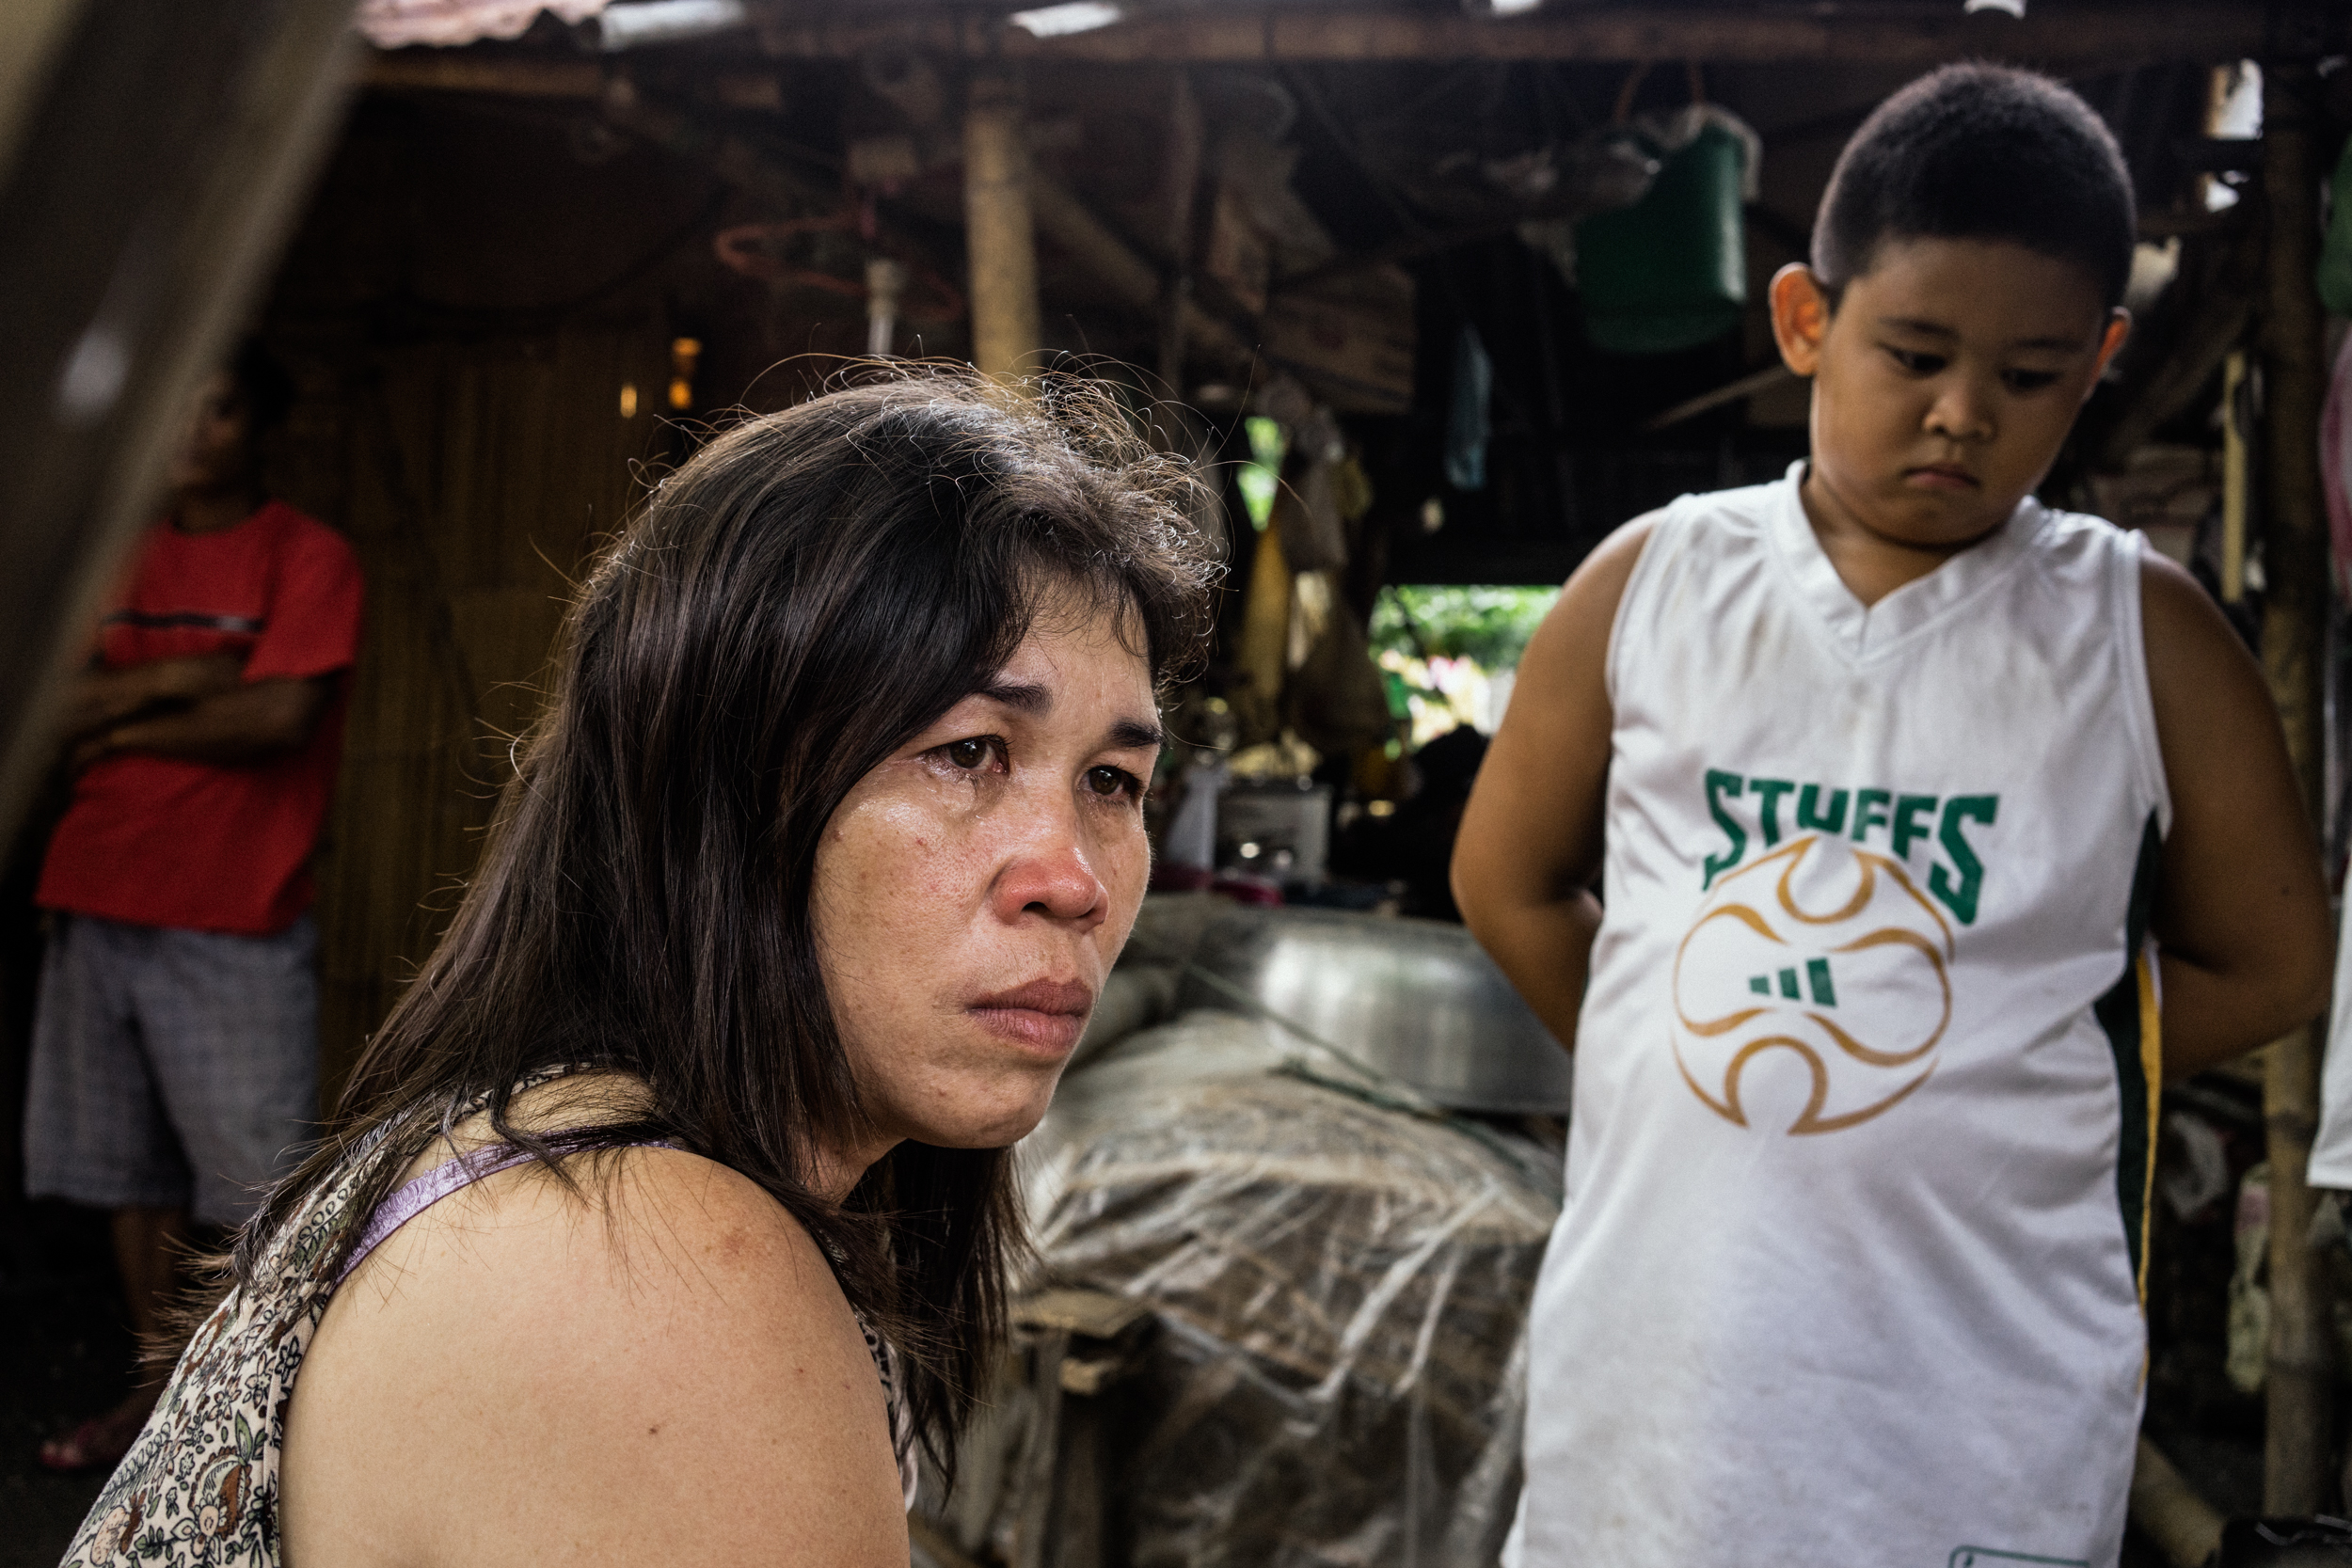  Kalibo, Philippines - September 20, 2015: Celia Robelo is seen with her son at a jail where she is being held on human trafficking and illegal recruitment charges following the death of a Filipino seafarer. Robelo claims that she did not have any kn